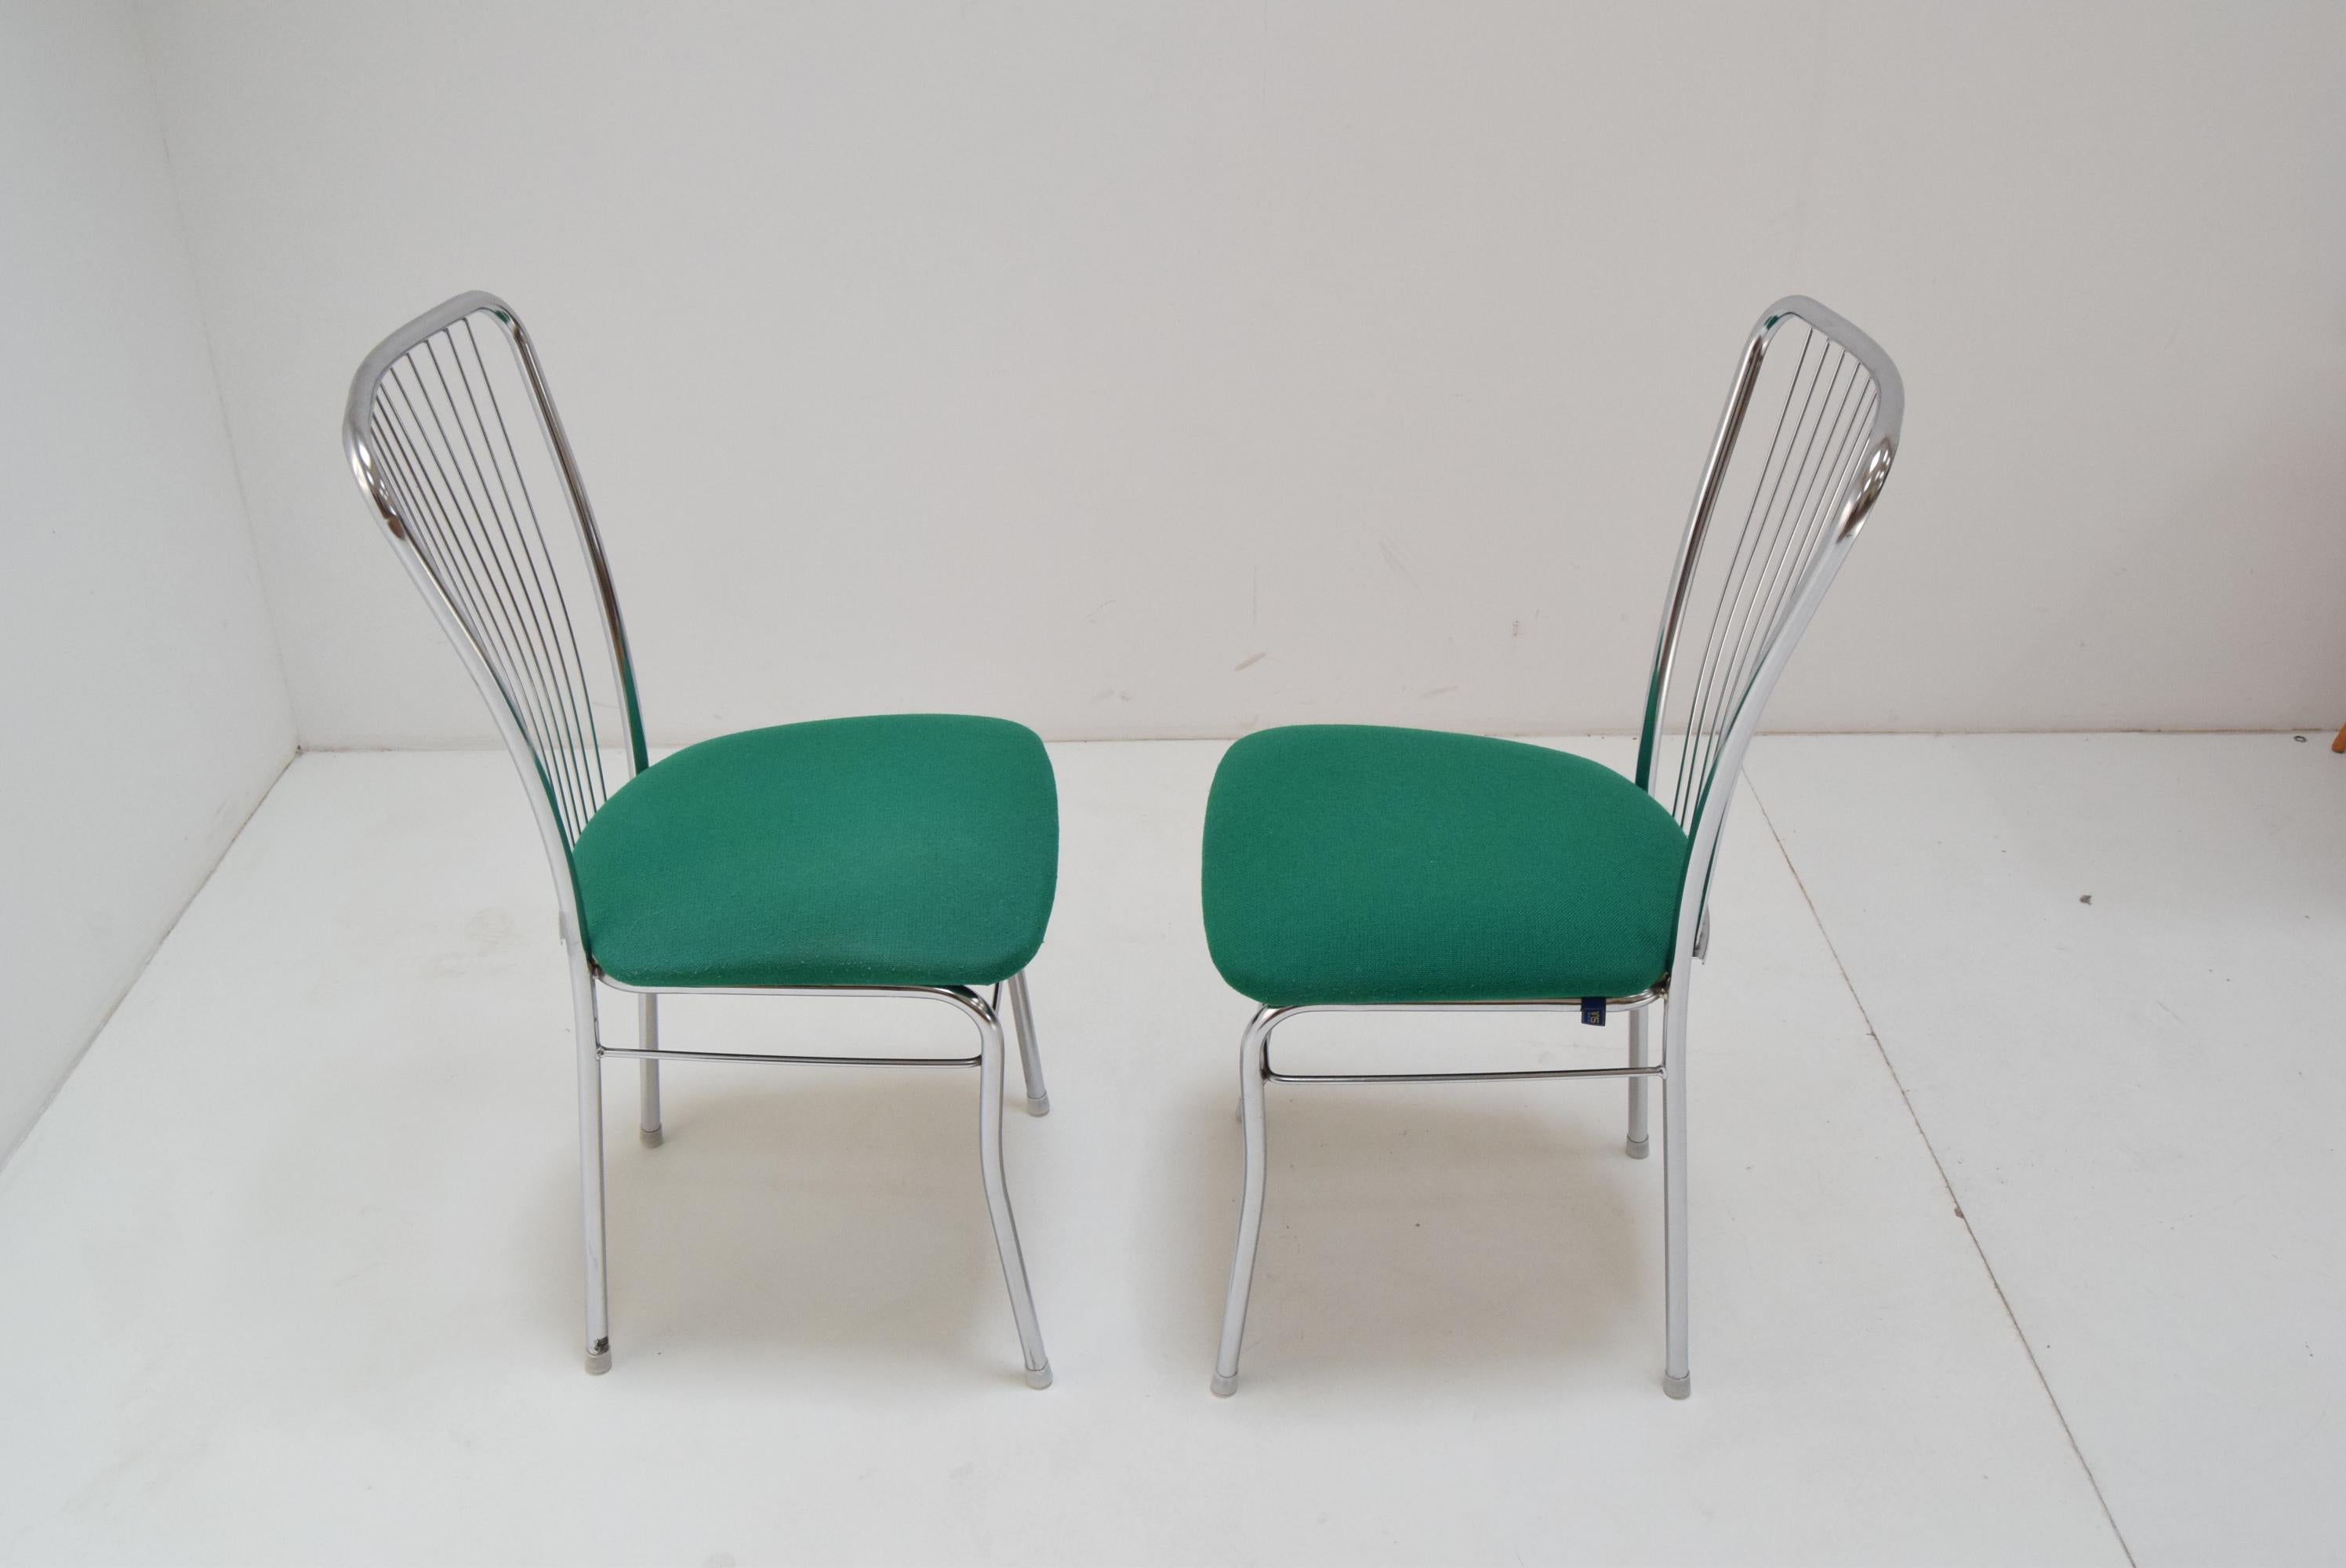 Czech Pair of Mid-Century Chrome Chairs, Nowy Styl, circa 1980's For Sale